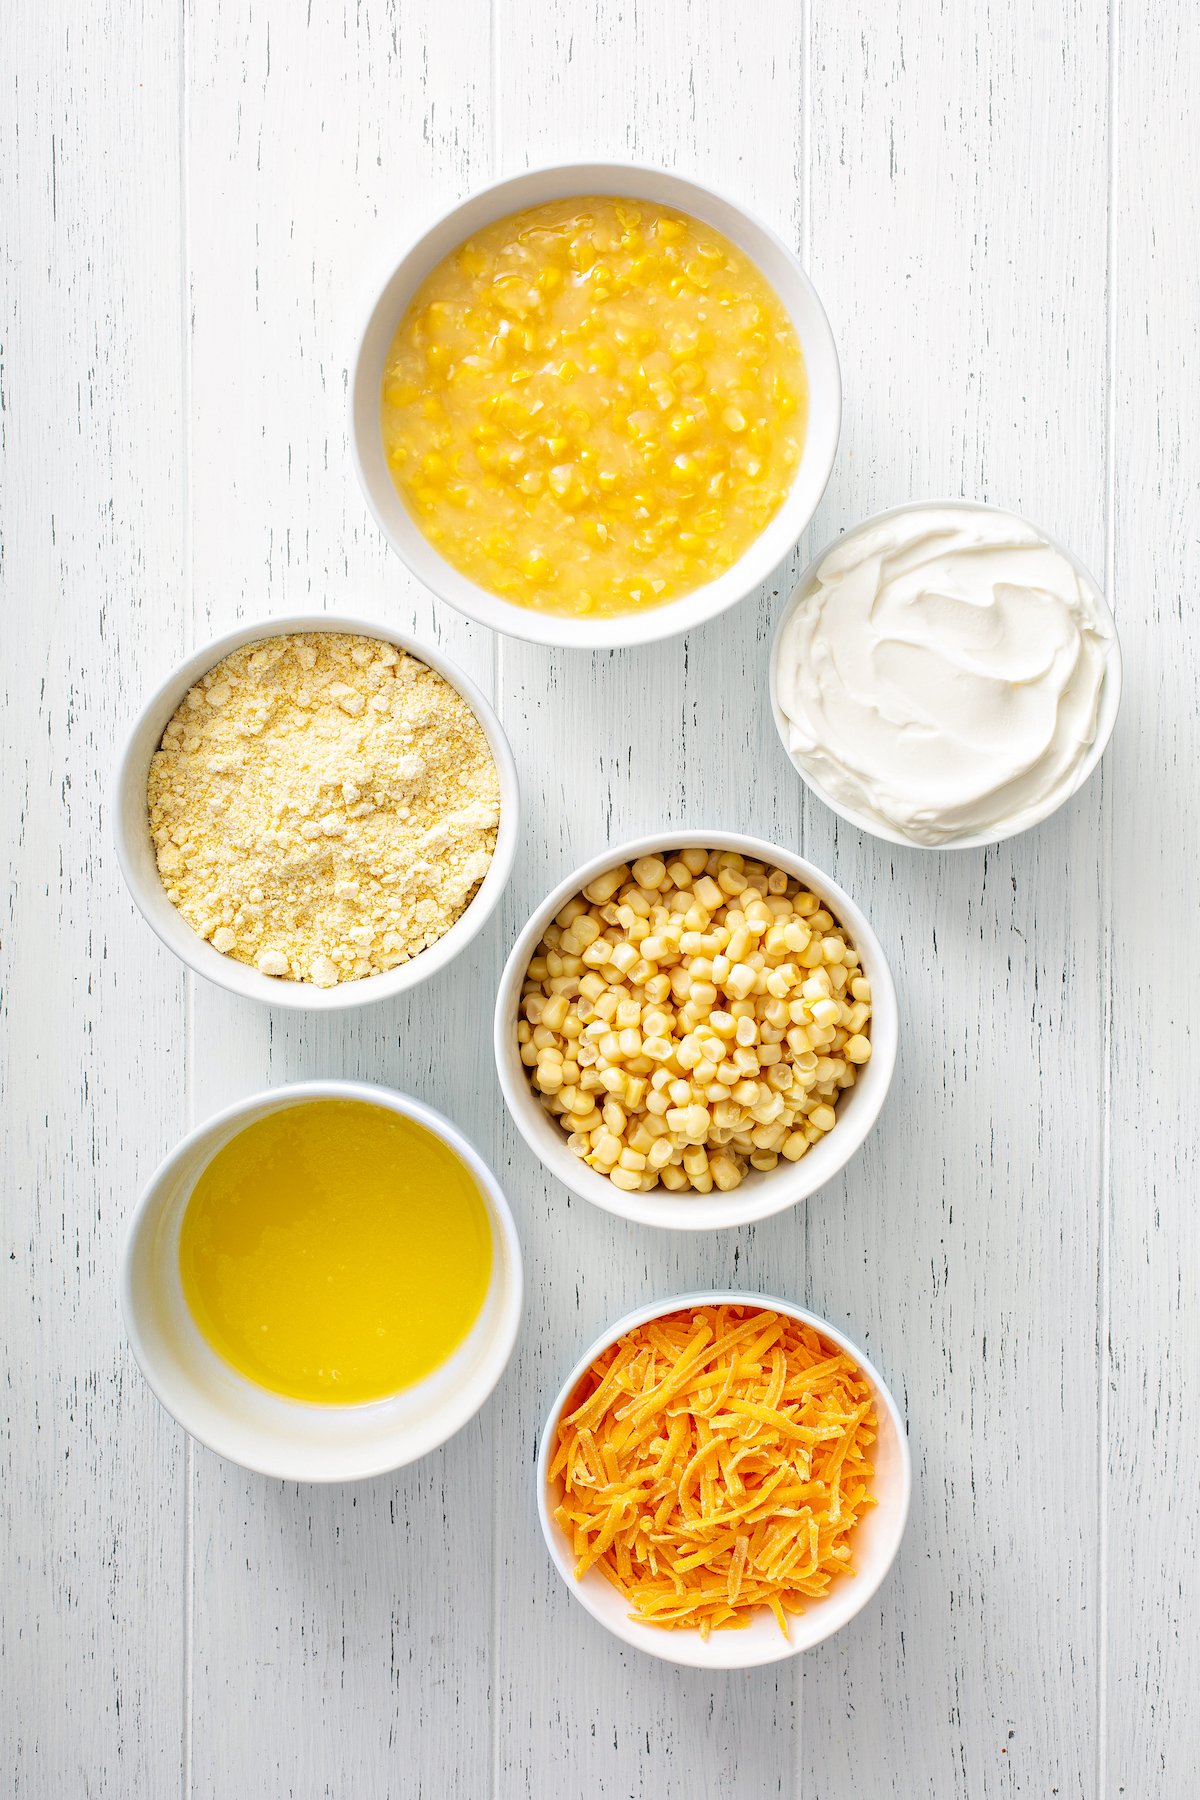 Ingredients for corn casserole recipe arranged in white bowls. From top: a bowl of creamed corn, a bowl of sour cream, a bowl of jiffy cornbread mix, a bowl of frozen corn kernels, a bowl of melted butter and a bowl of shredded cheddar cheese.